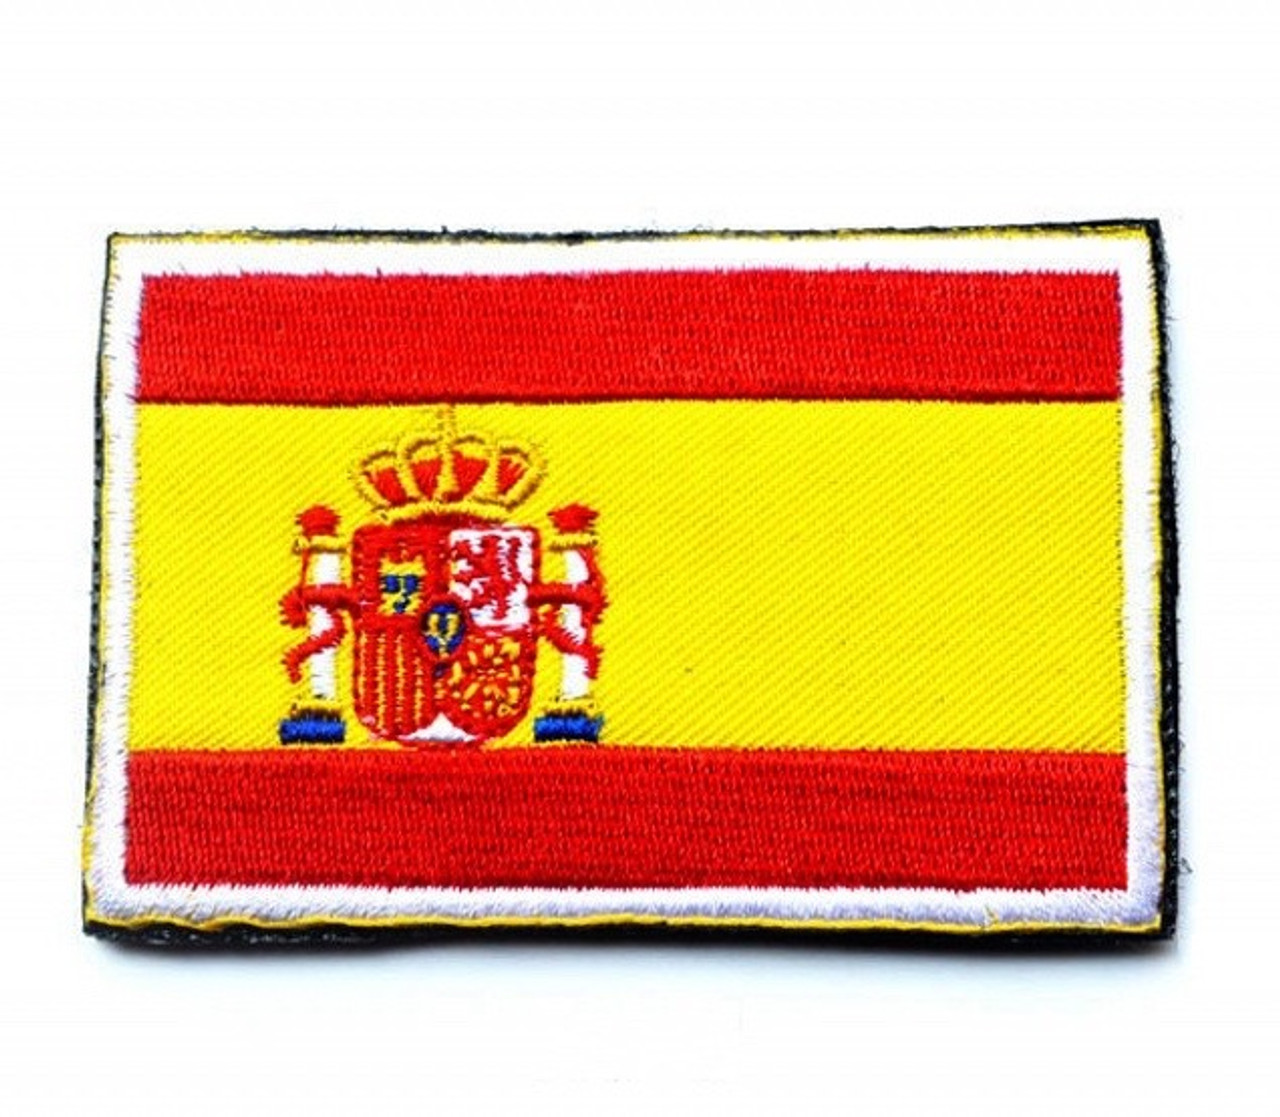 Spain National Flag Embroidered Patch Iron on Sew On Badge For Clothes etc 